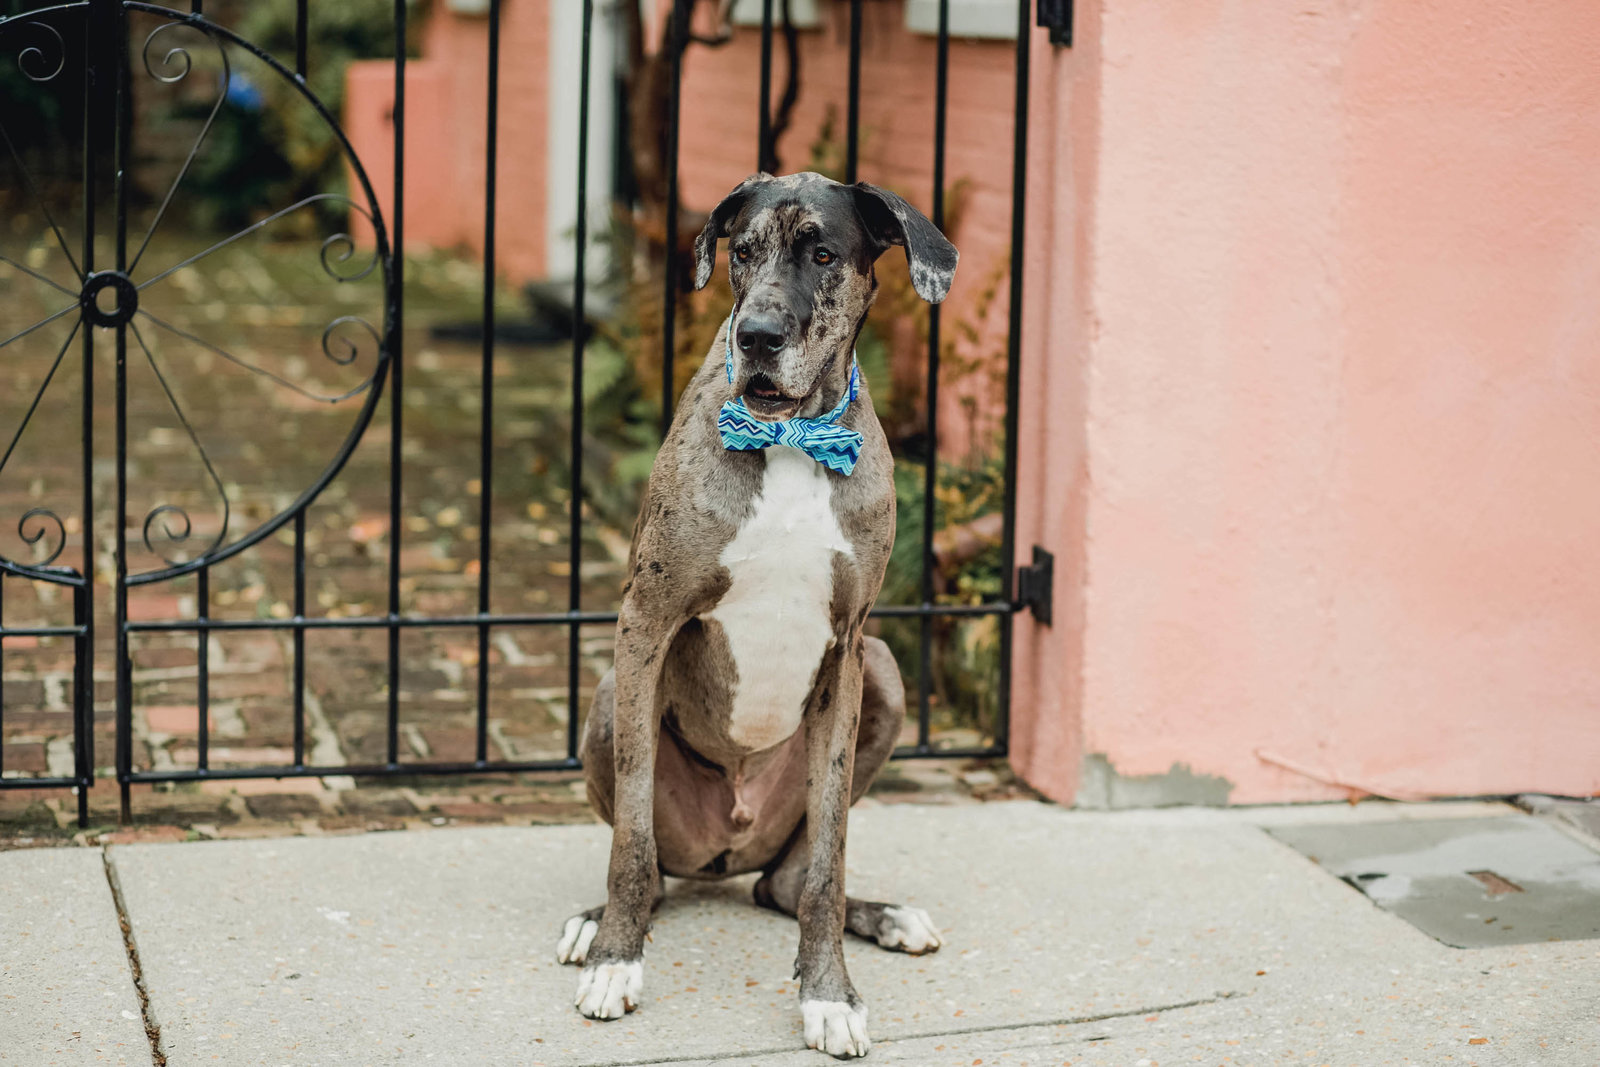 dog-lifestyle-fun-silly-portrait-candid-charleston-sc-kate-timbers-photography-10214